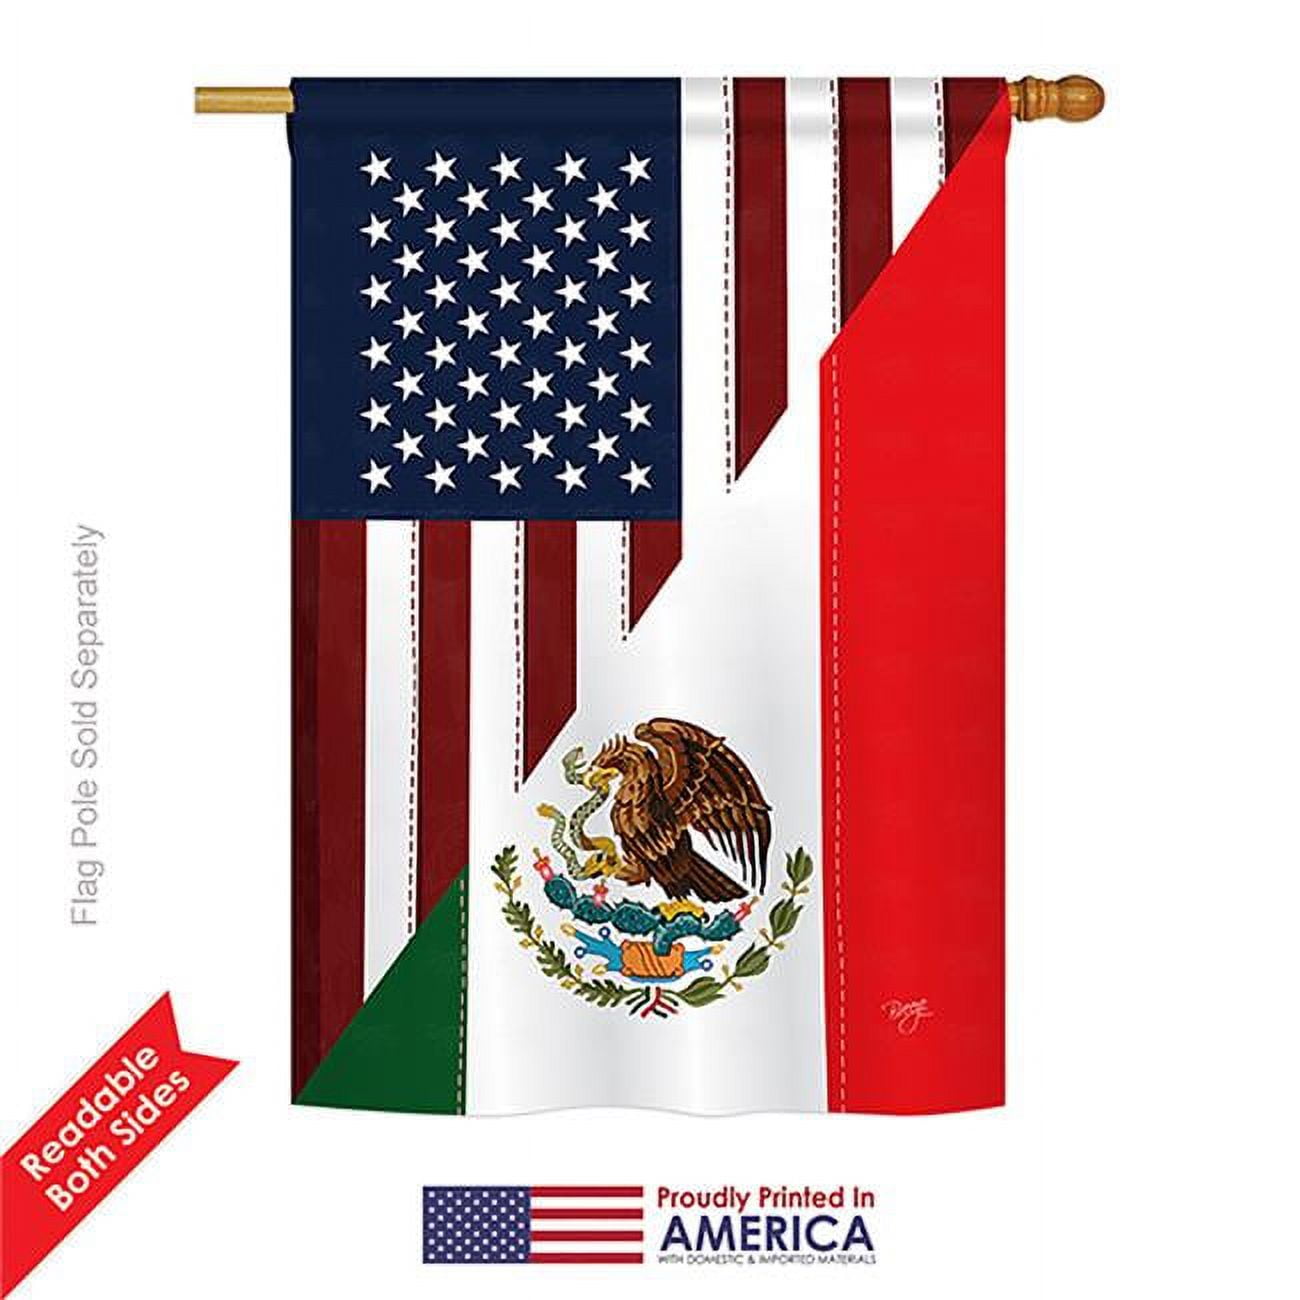 The Flag of the United States of Mexico